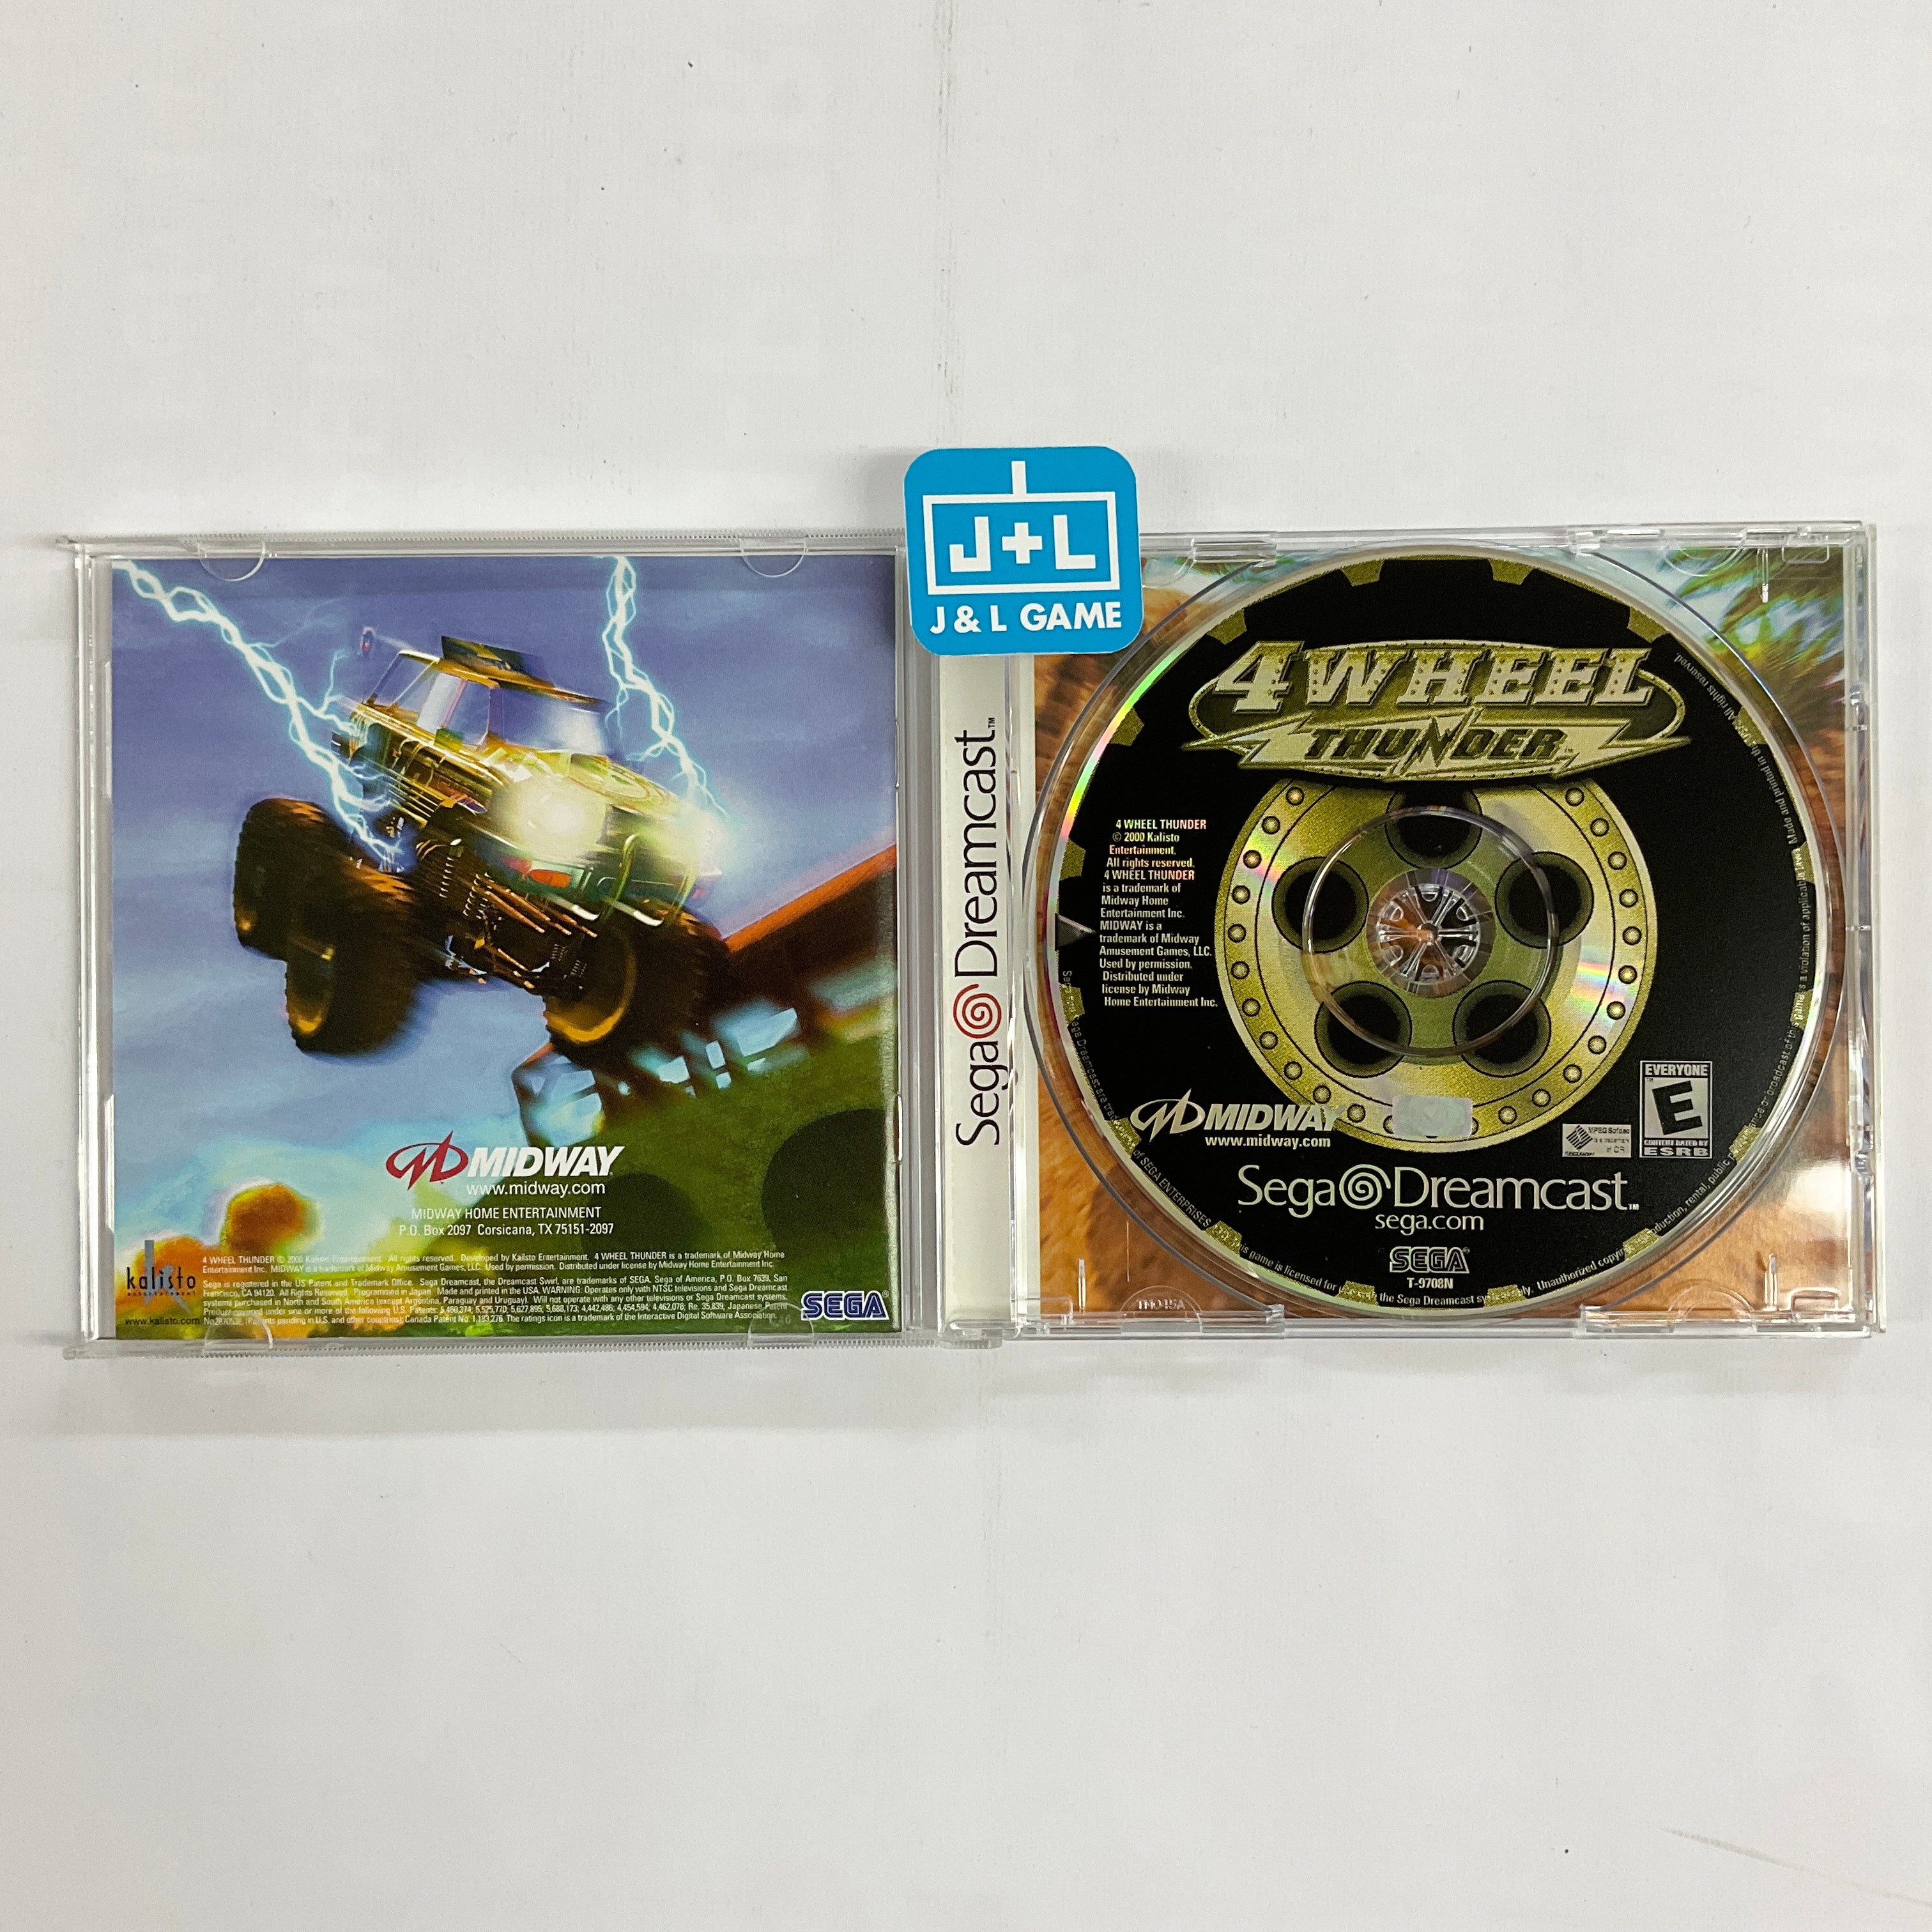 4 Wheel Thunder - (DC) SEGA Dreamcast [Pre-Owned] Video Games Midway   